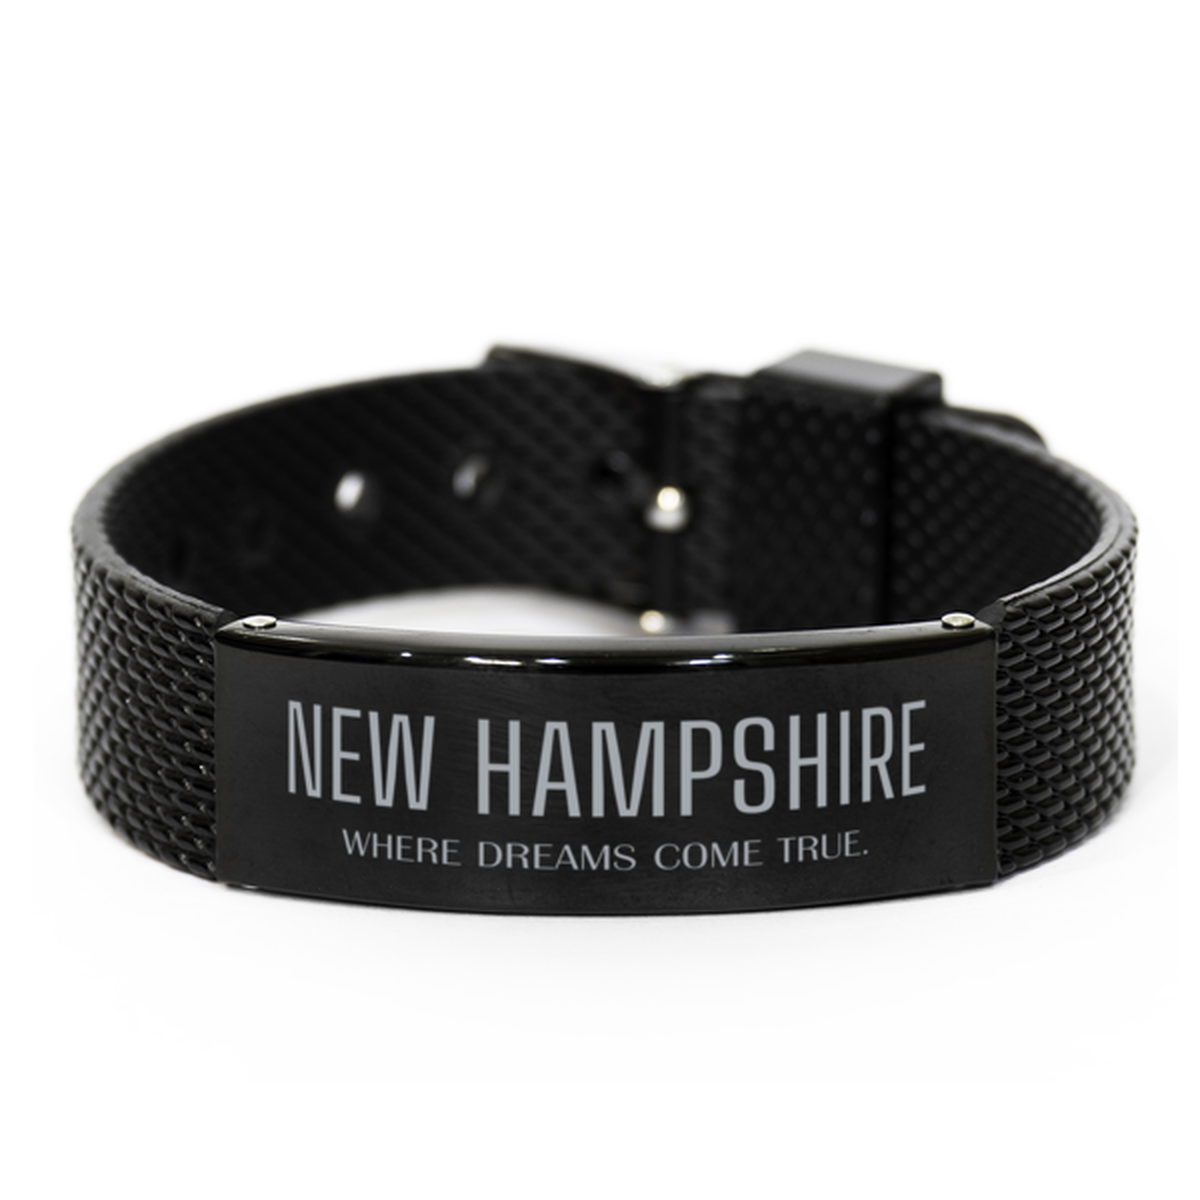 Love New Hampshire State Black Shark Mesh Bracelet, New Hampshire Where dreams come true, Birthday Inspirational Gifts For New Hampshire Men, Women, Friends